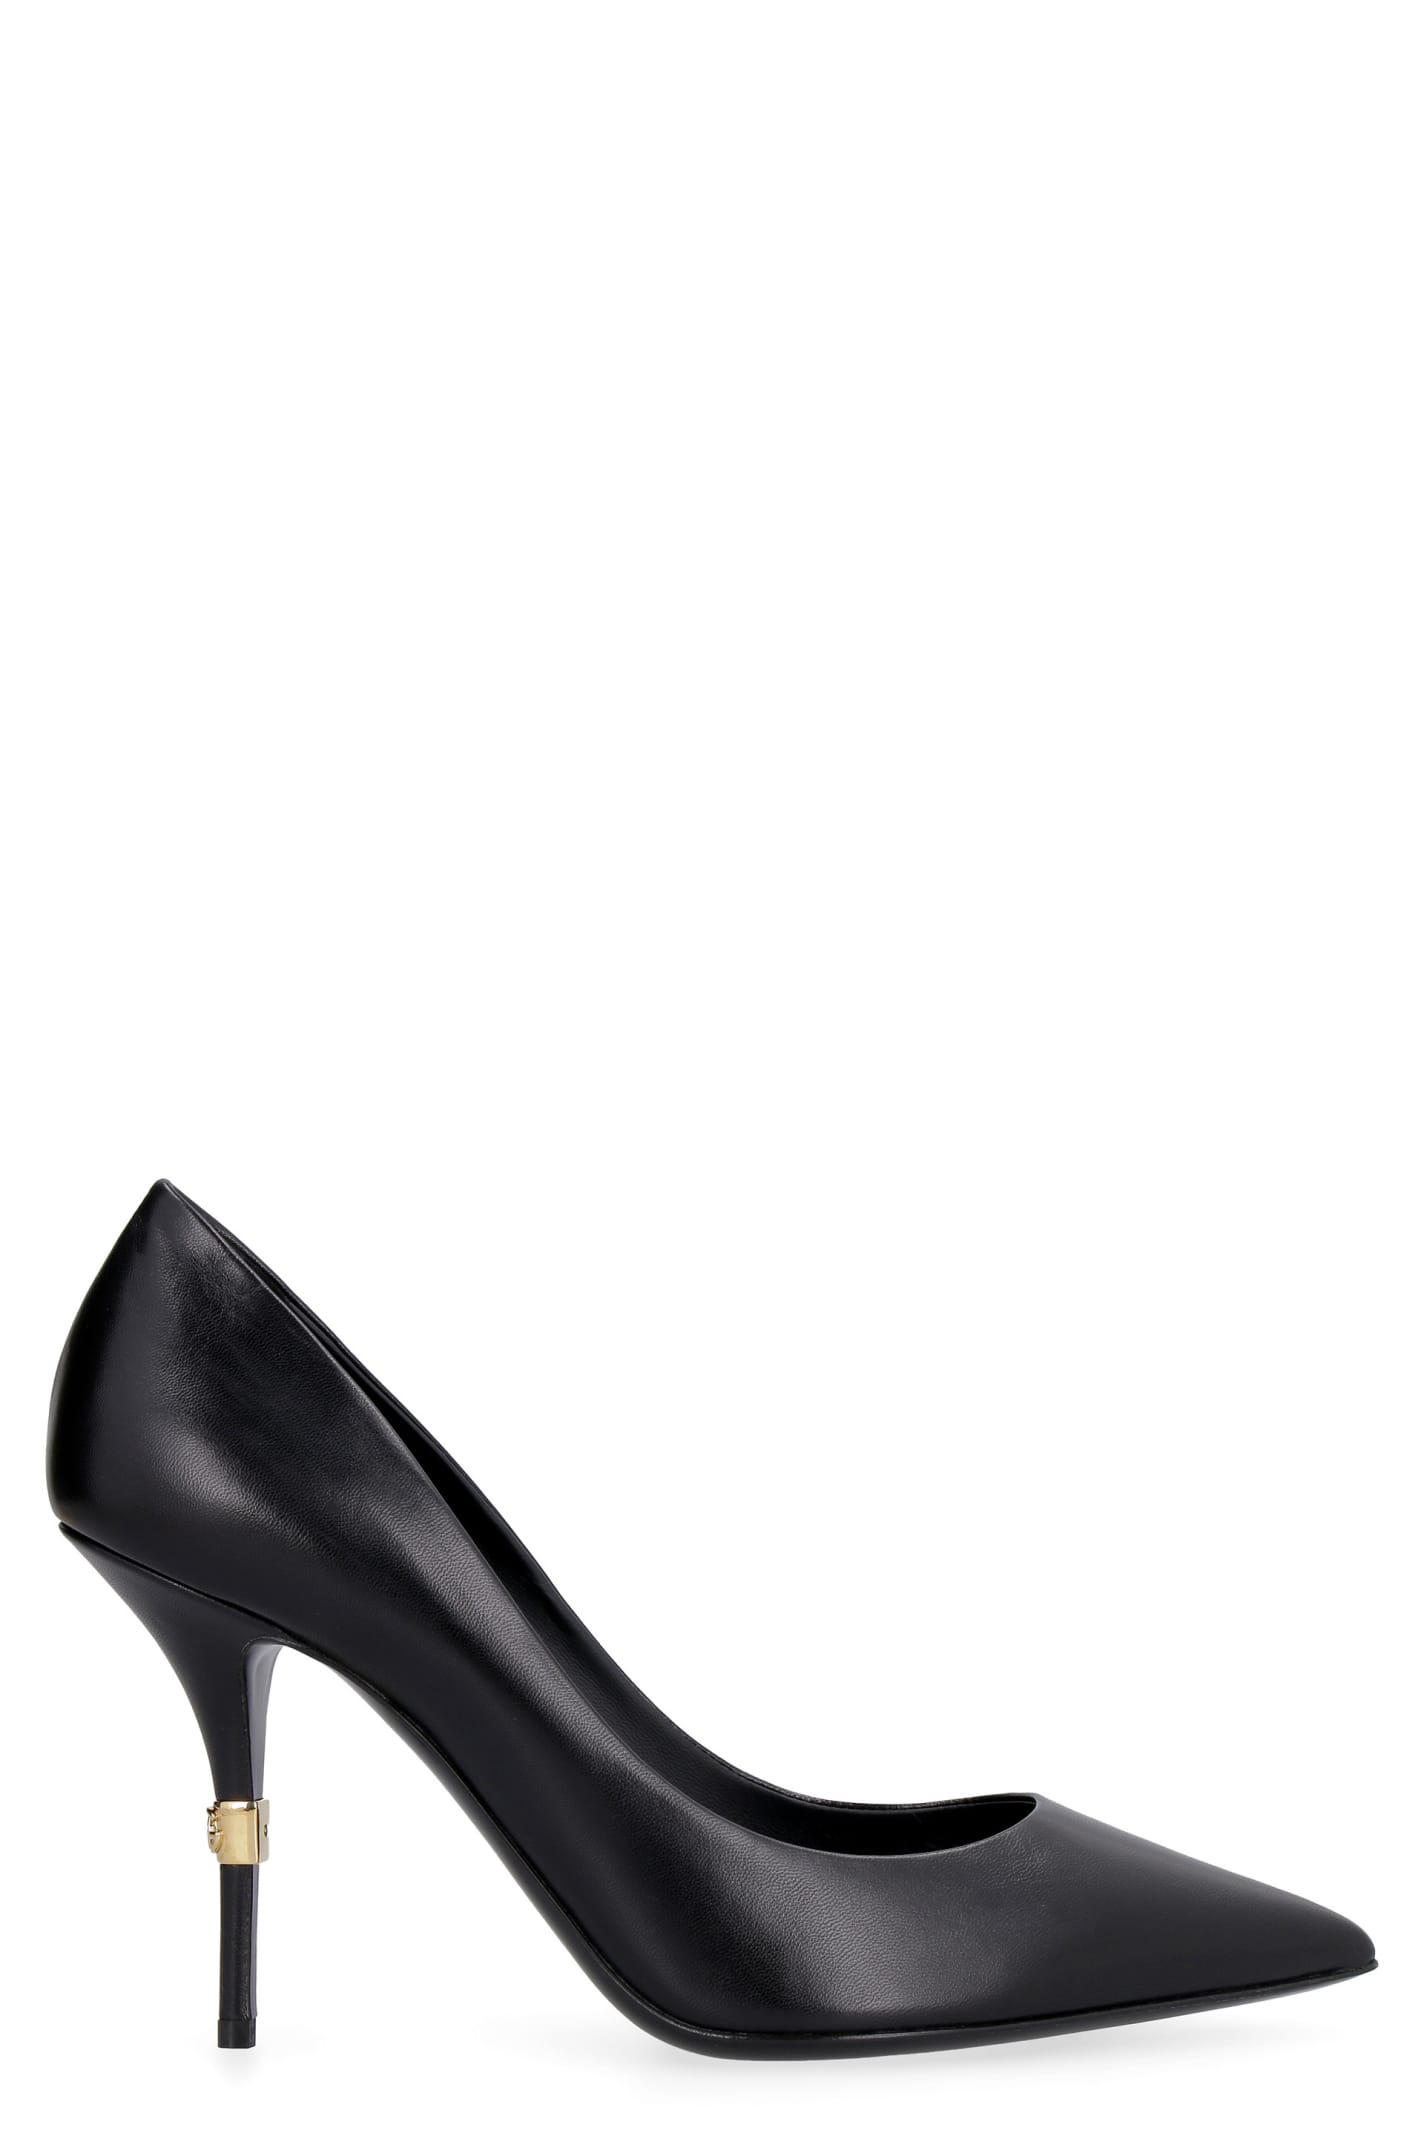 Buy Dolce & Gabbana Cardinale Leather Pointy-toe Pumps online, shop Dolce & Gabbana shoes with free shipping